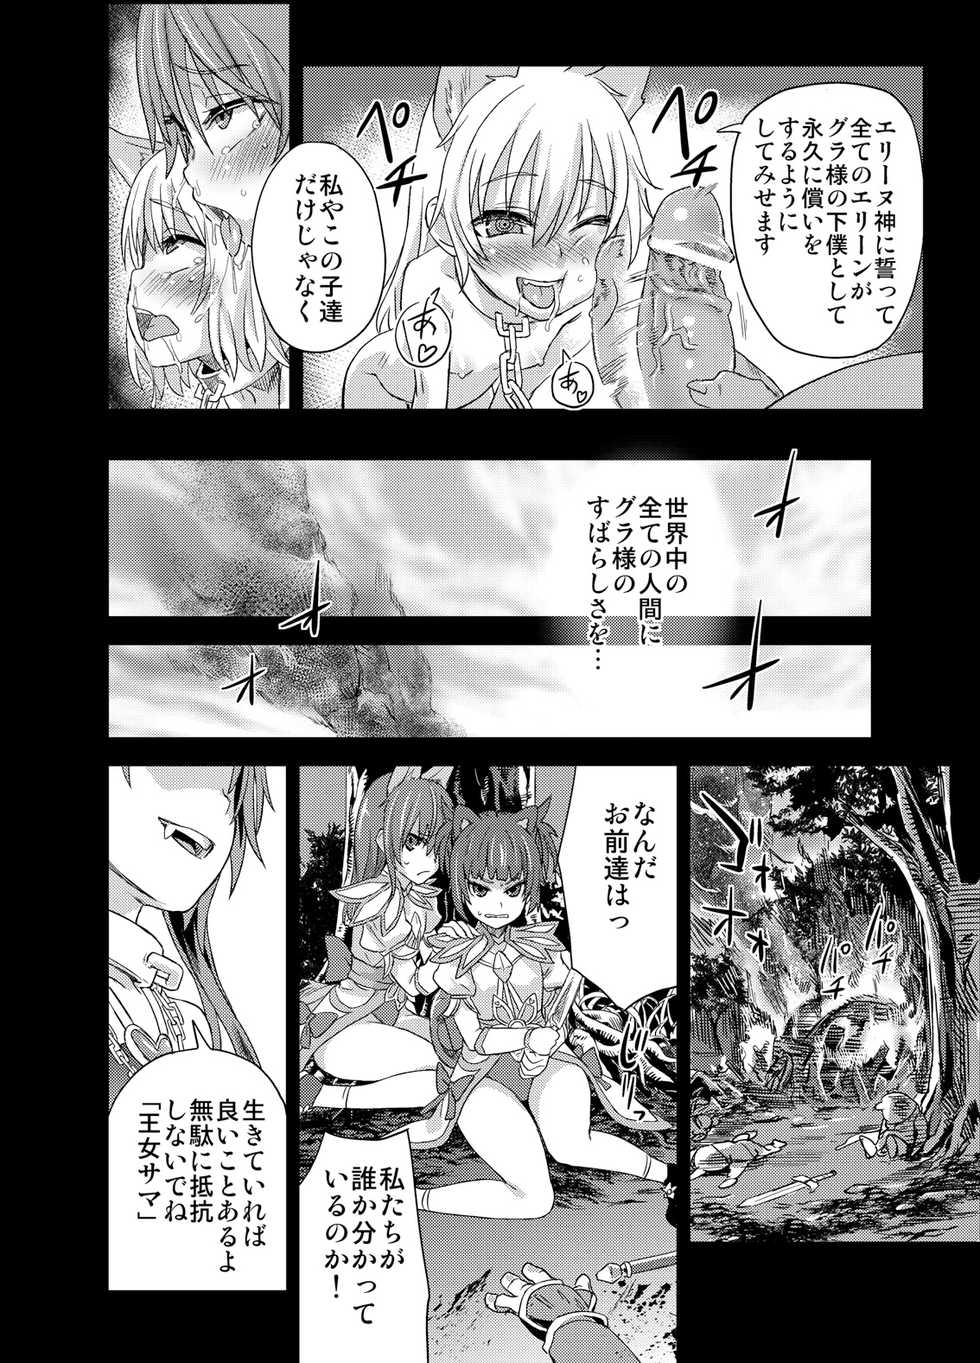 [Fatalpulse (Asanagi)] Victim Girls 12 Another one Bites the Dust (TERA The Exiled Realm of Arborea) [Digital] - Page 25